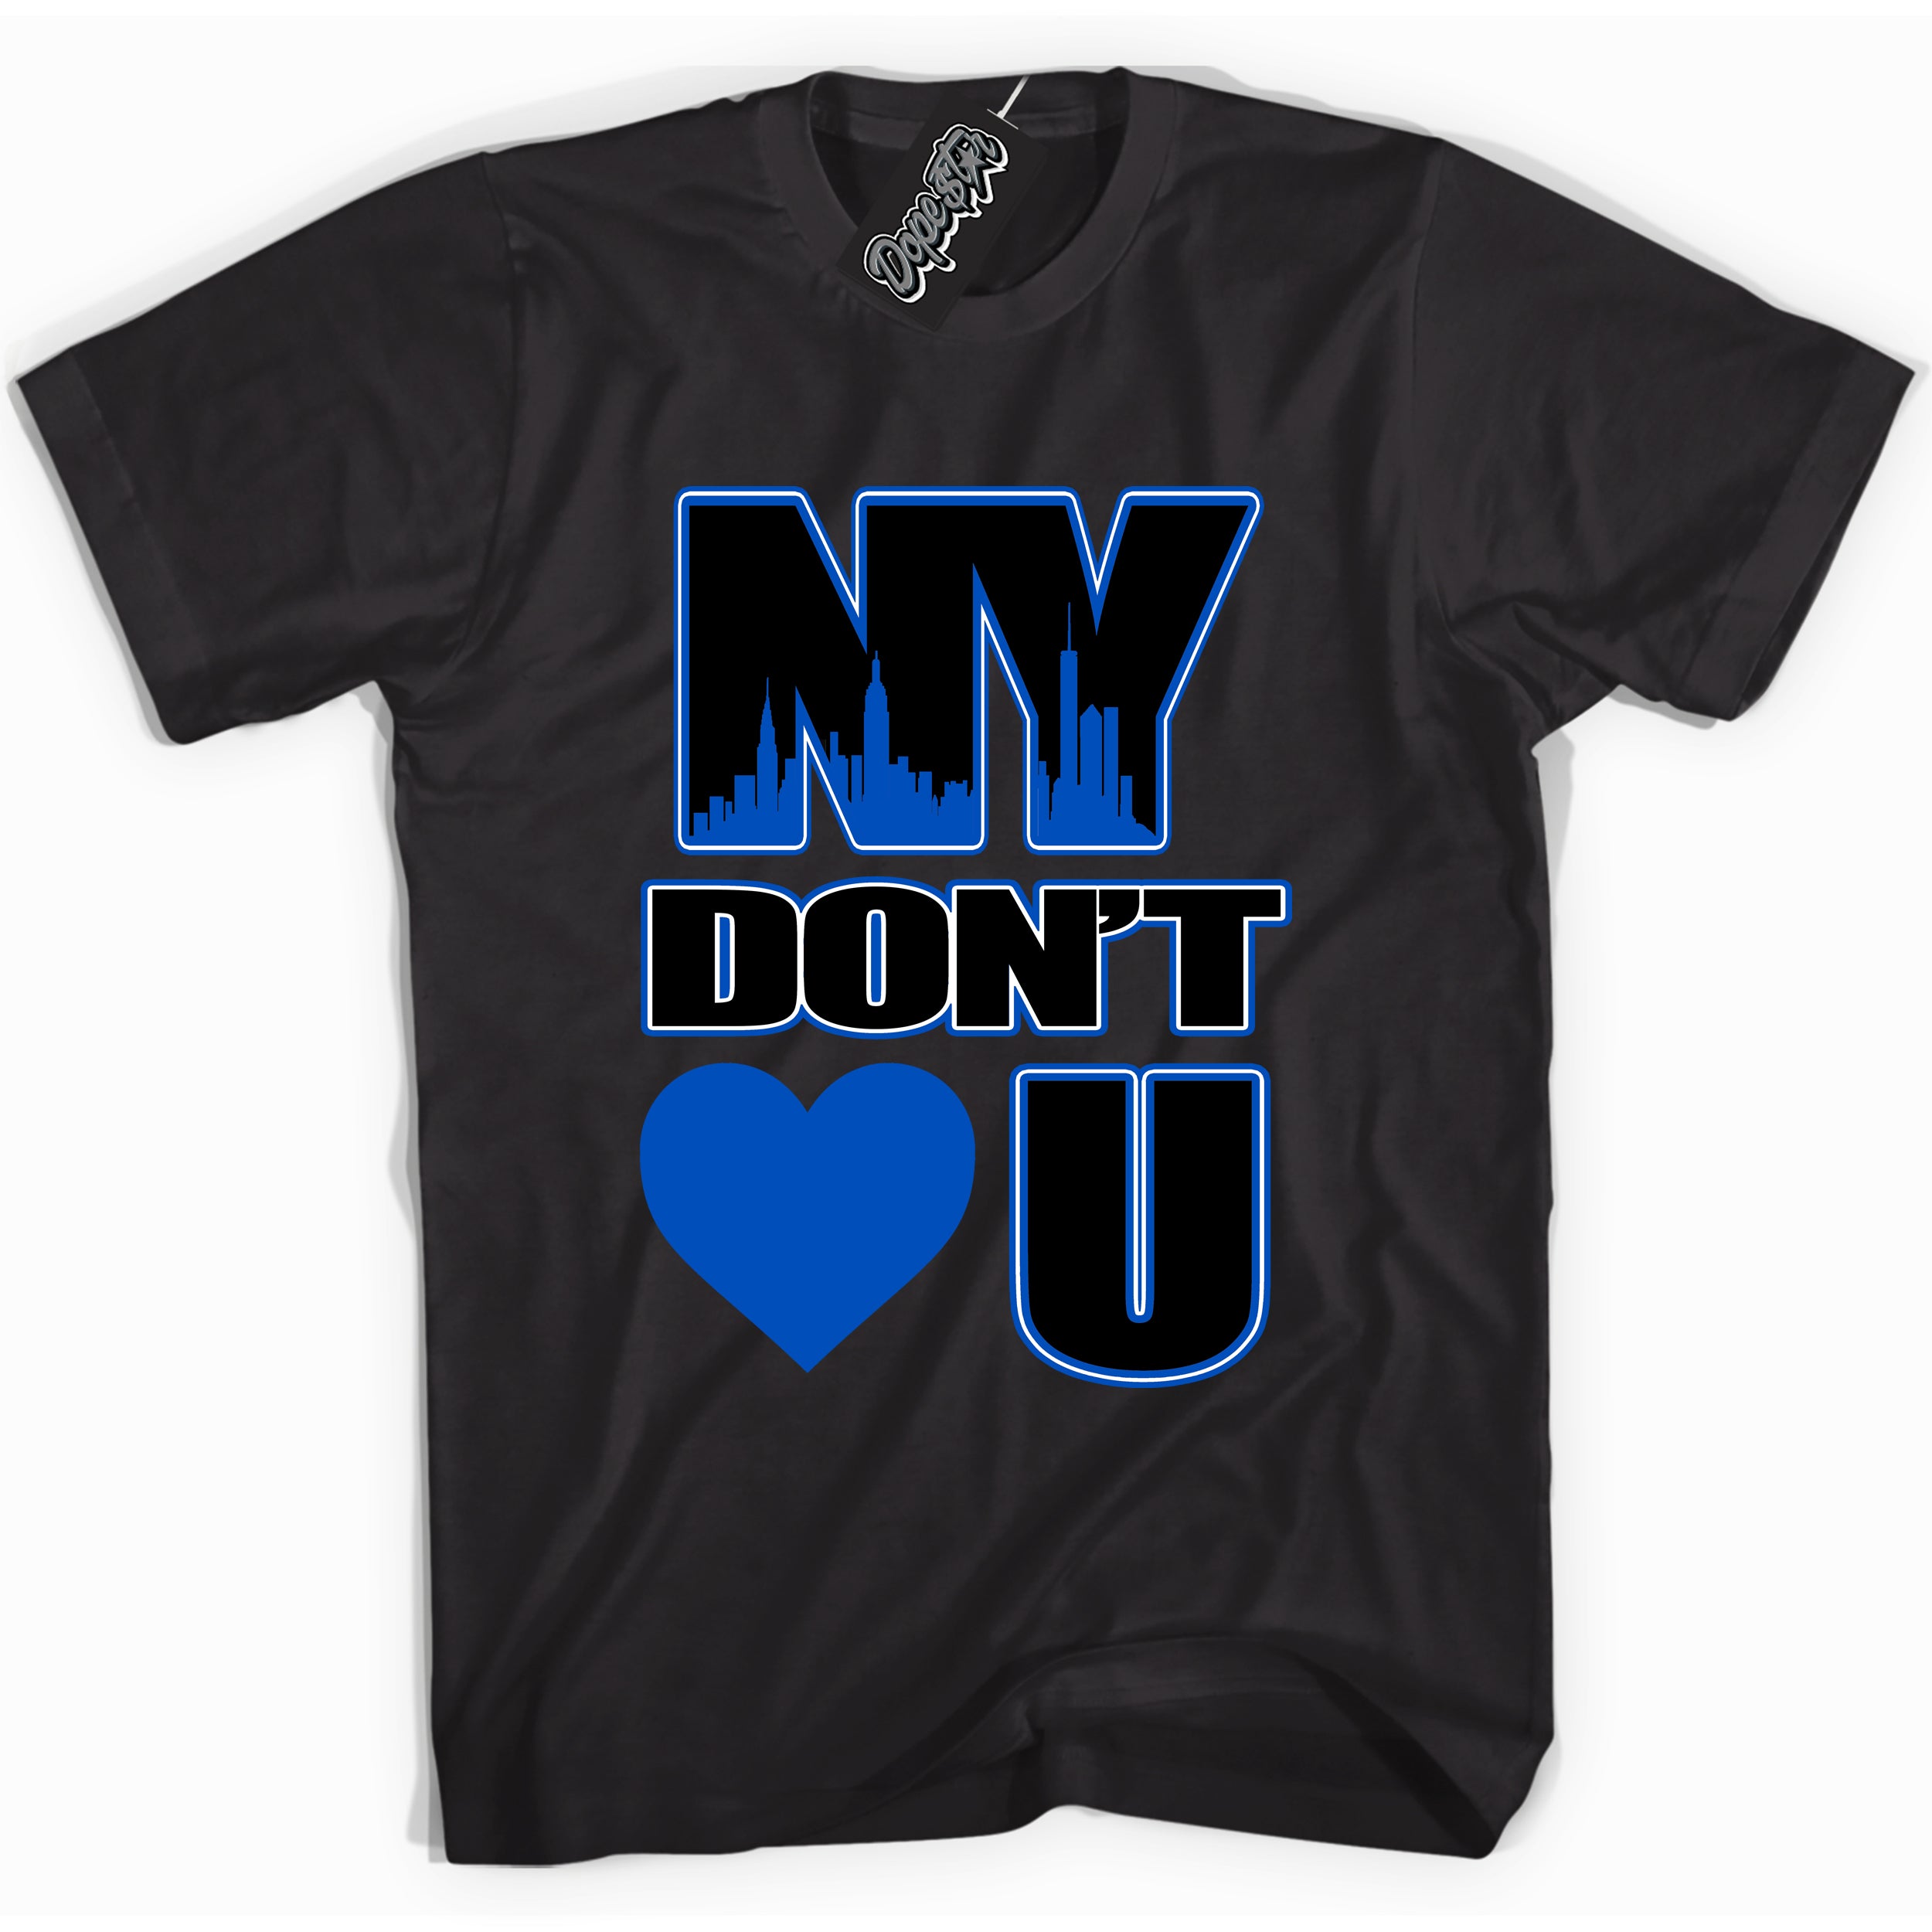 Cool Black graphic tee with “ NY Don’t Love U” design, that perfectly matches Royal Reimagined 1s sneakers 